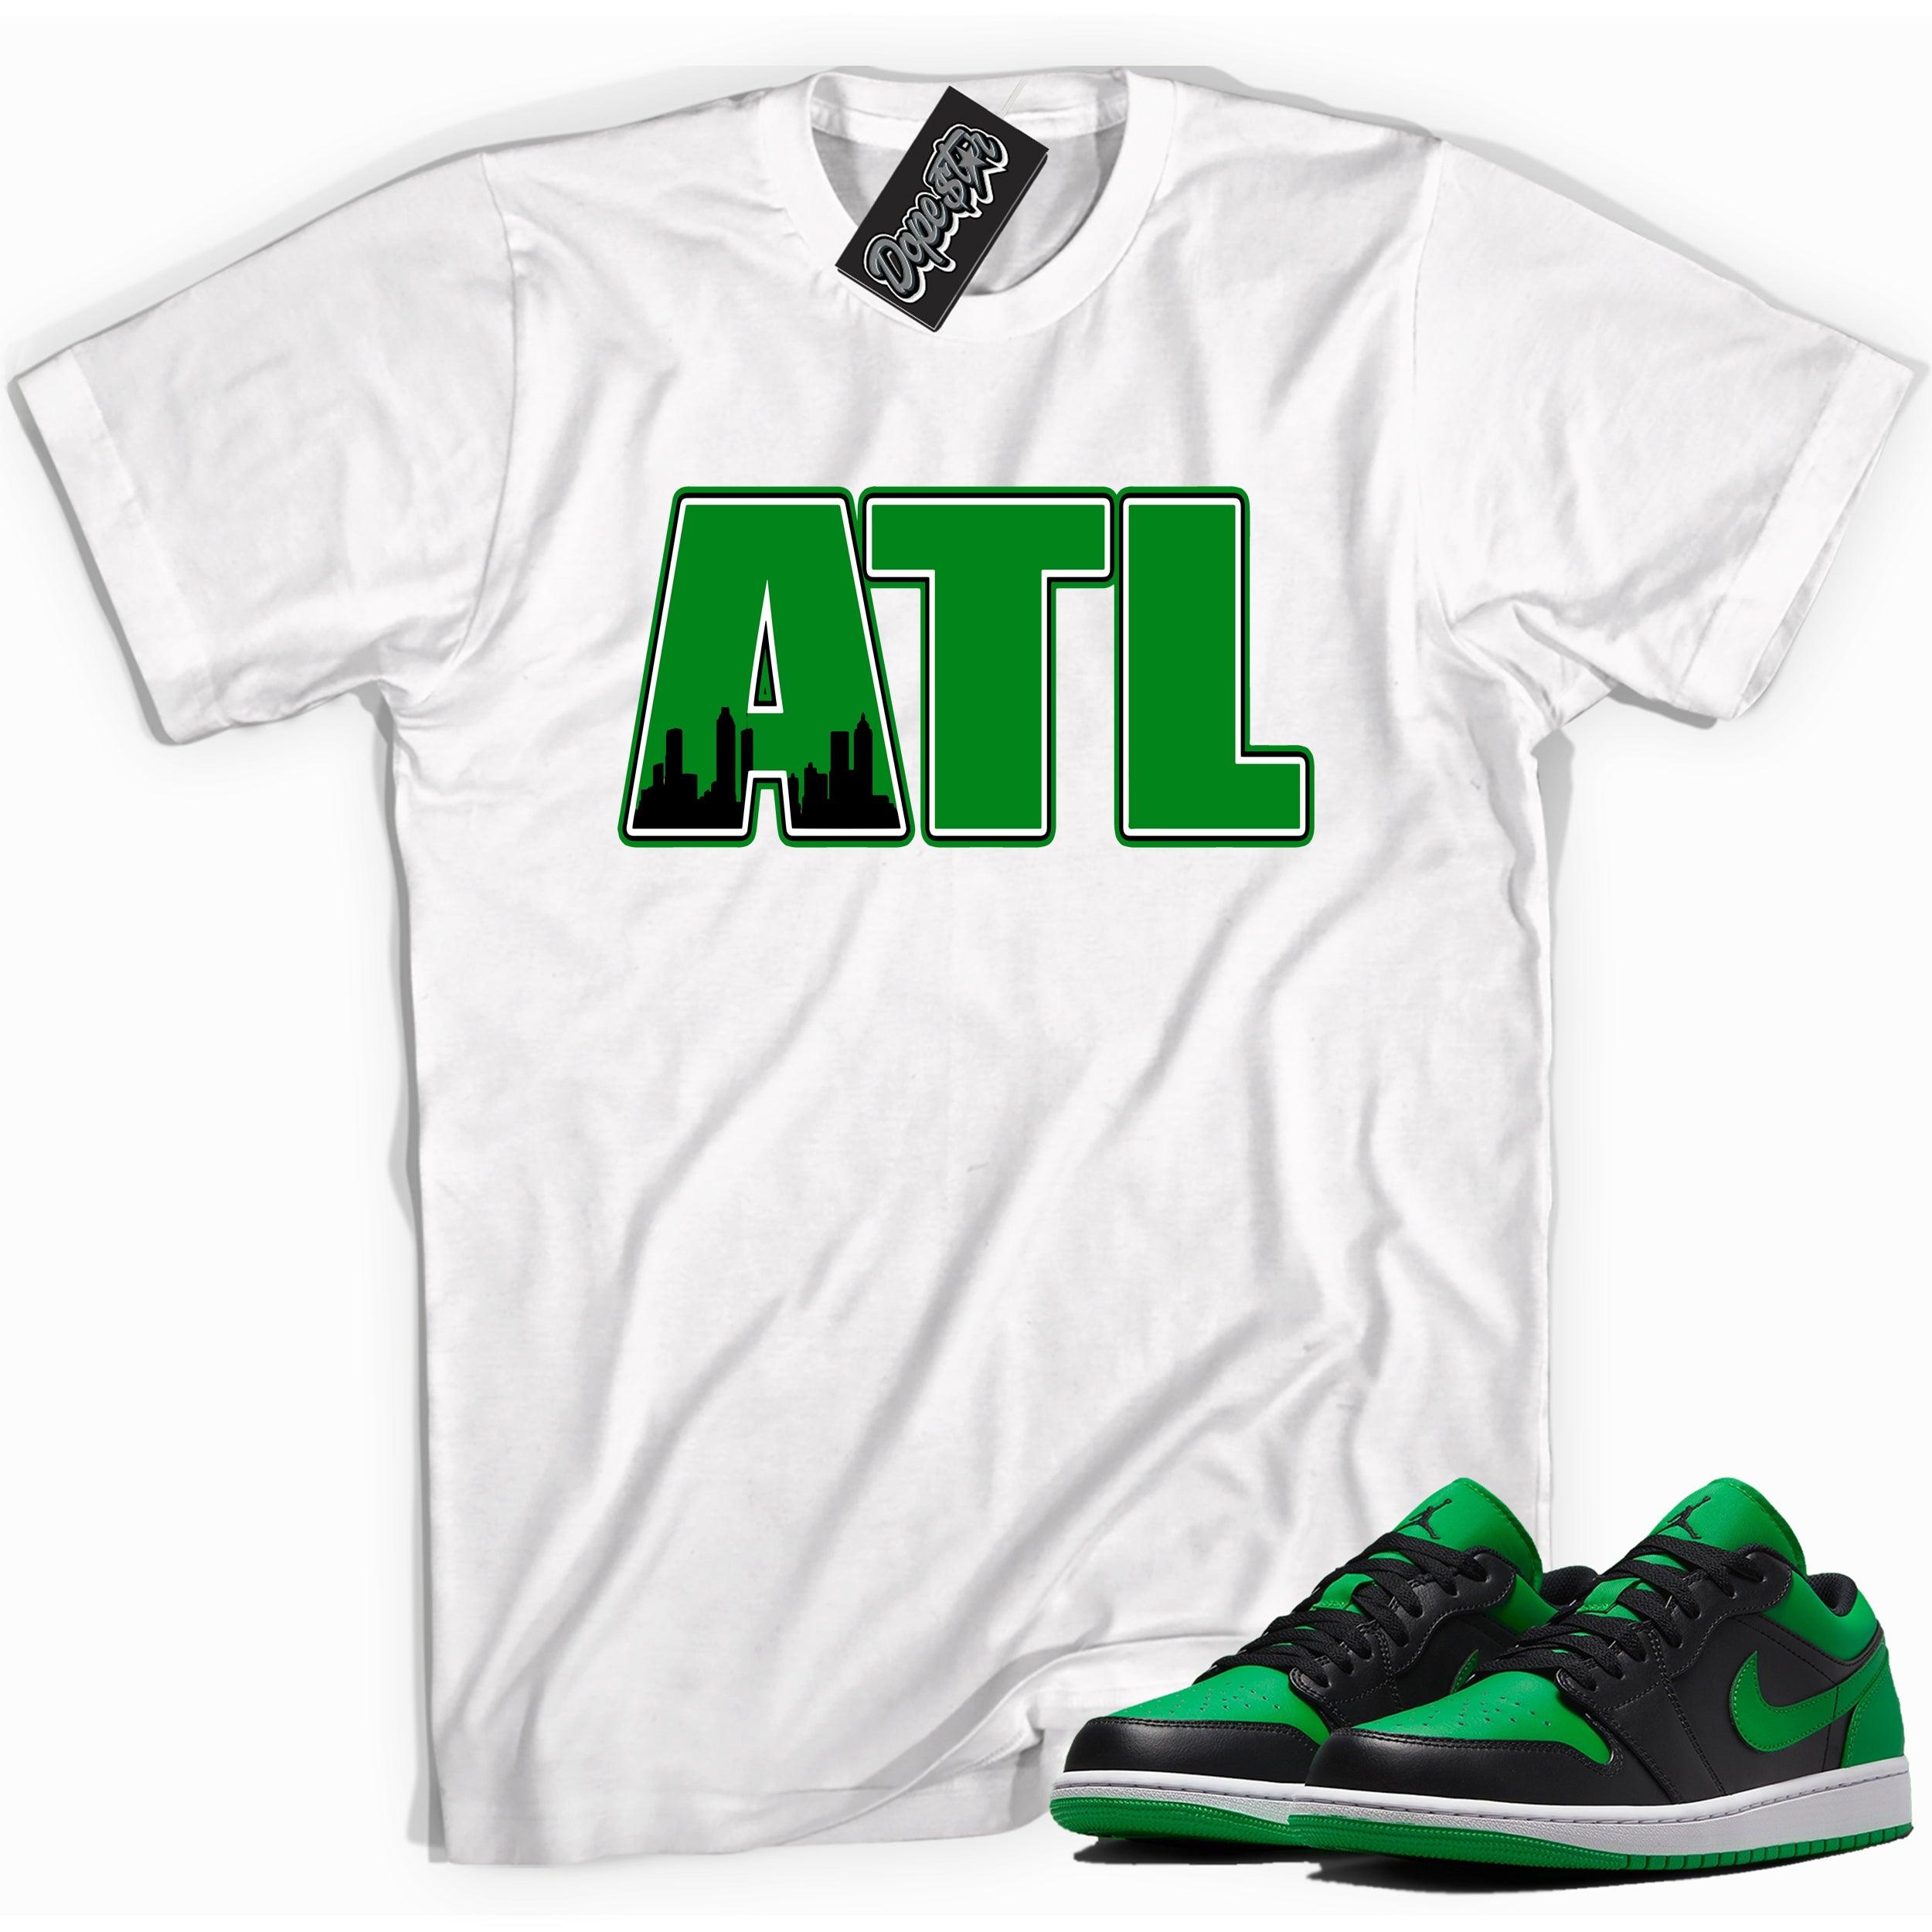 Cool white graphic tee with 'ATL' print, that perfectly matches Air Jordan 1 Low Lucky Green sneakers